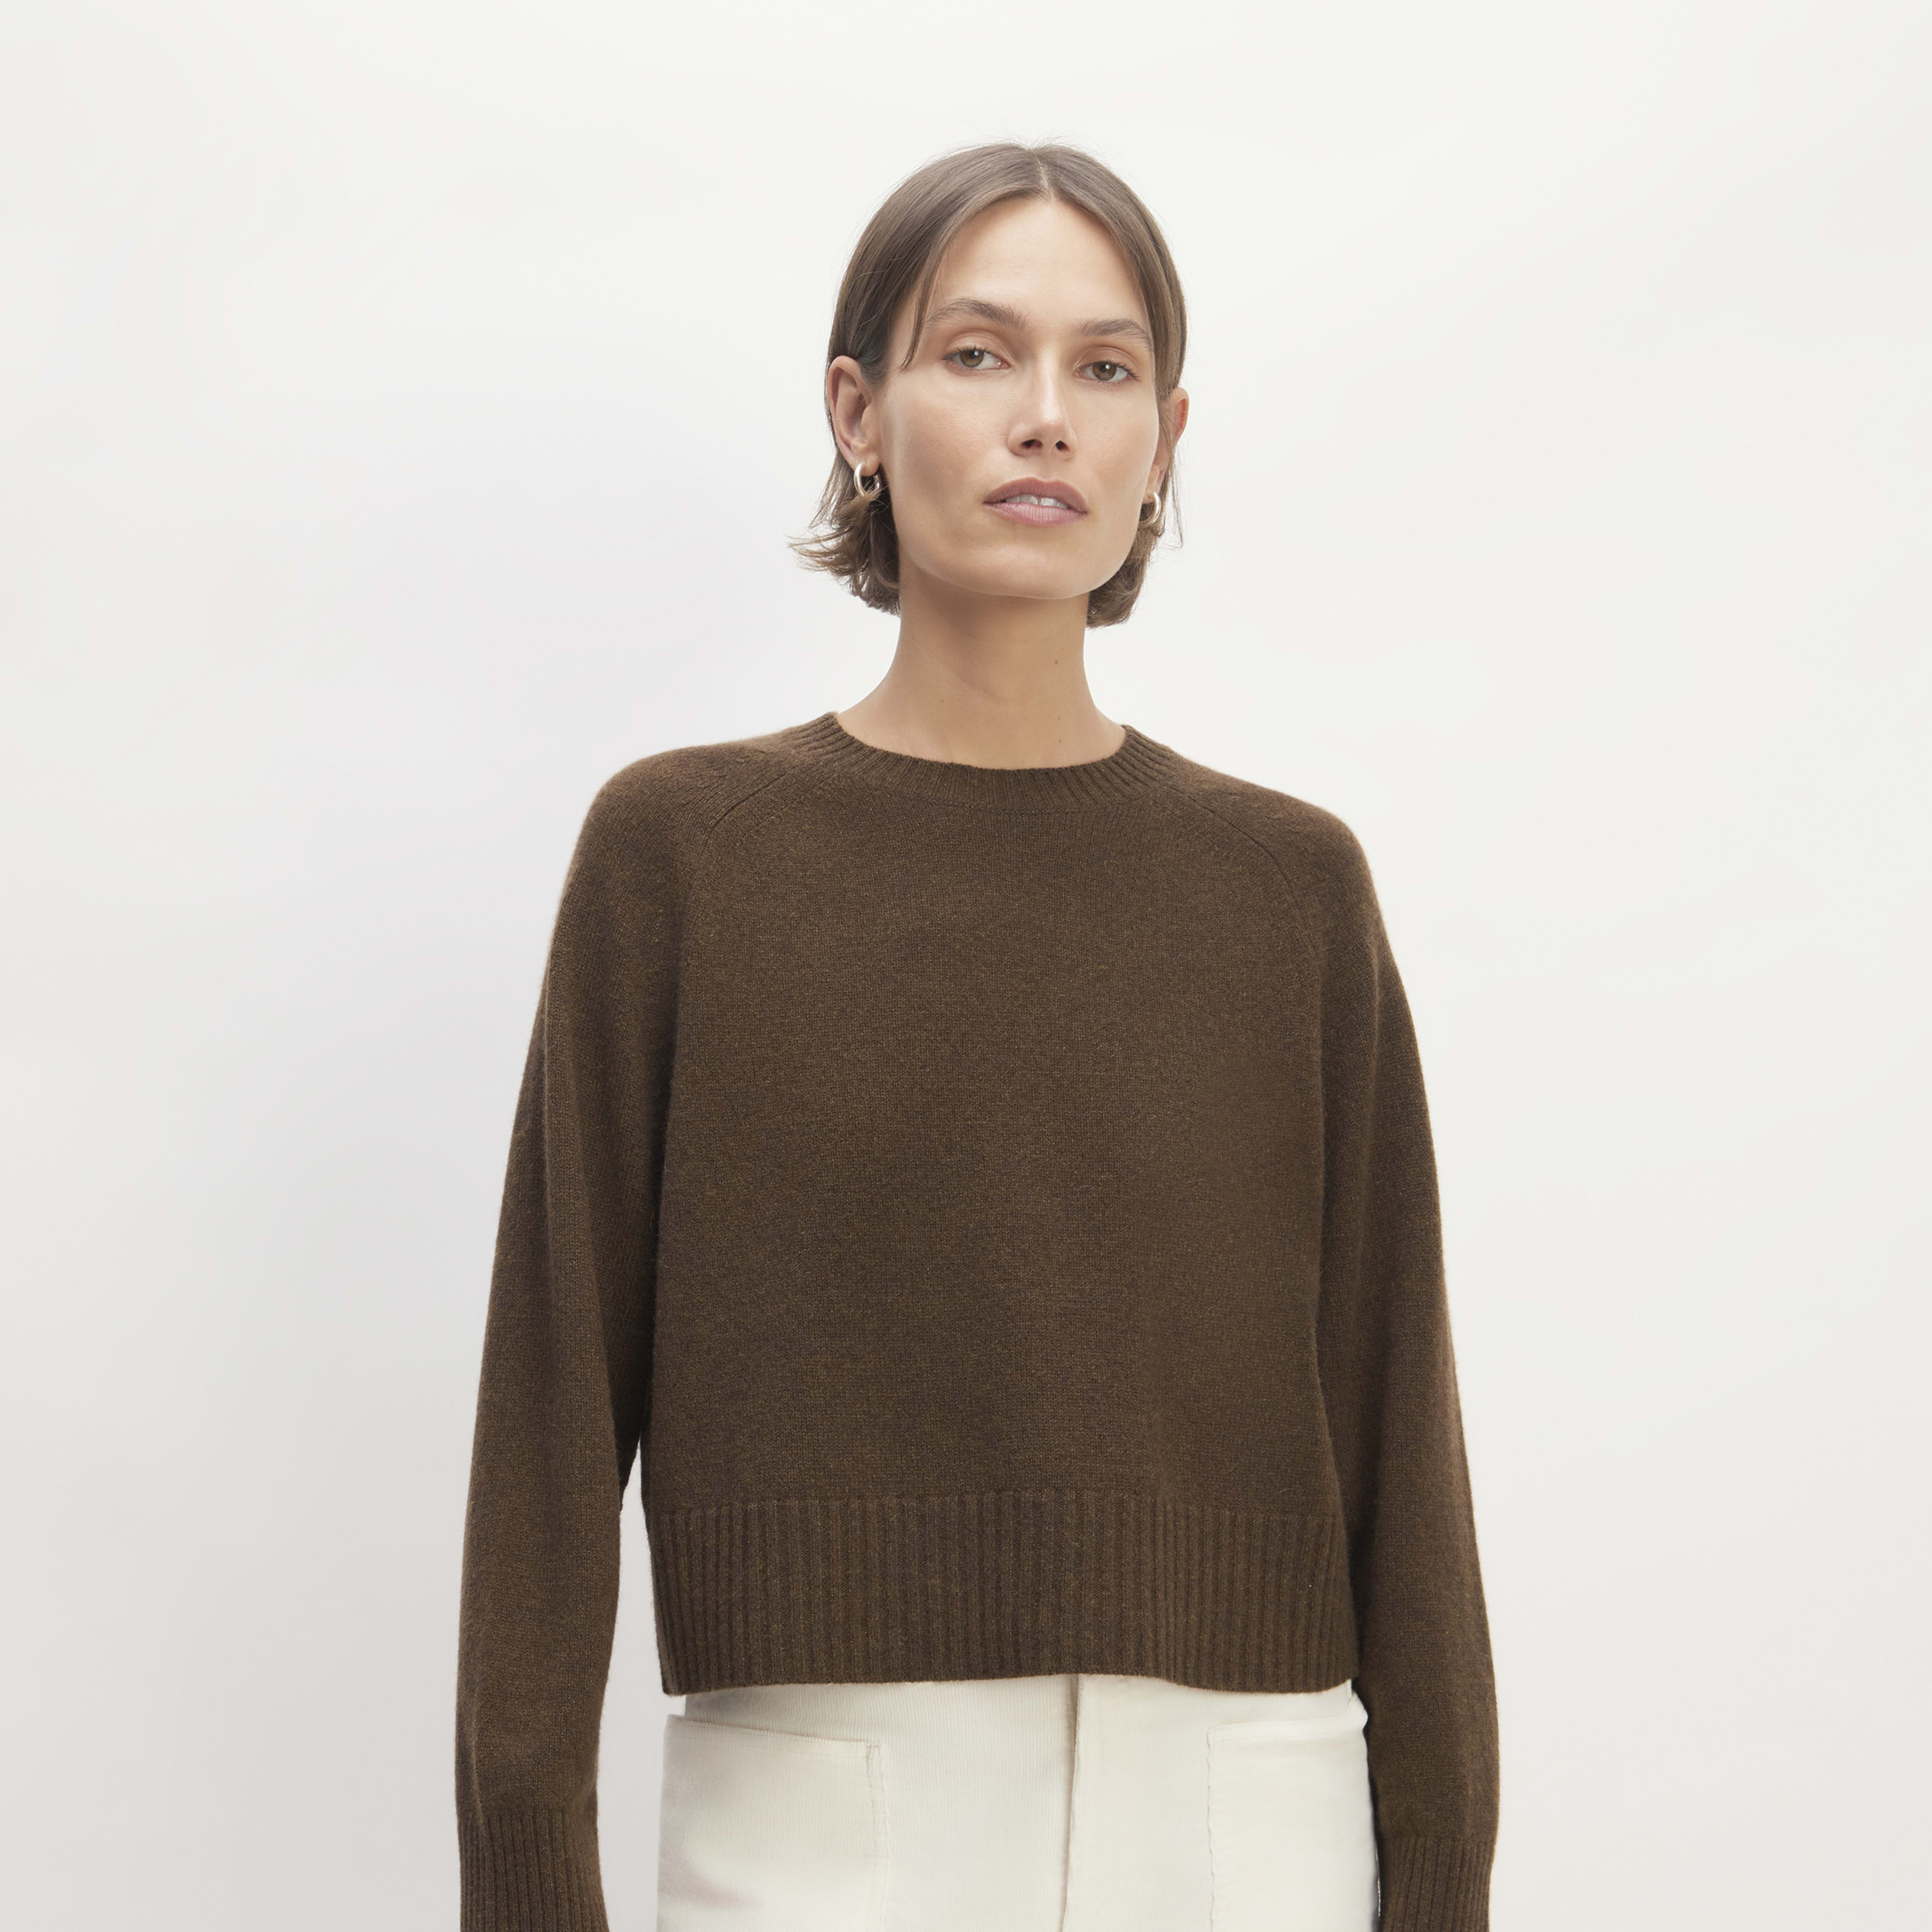 women's cashmere boxy crew sweater by everlane in heather brown, size xxs